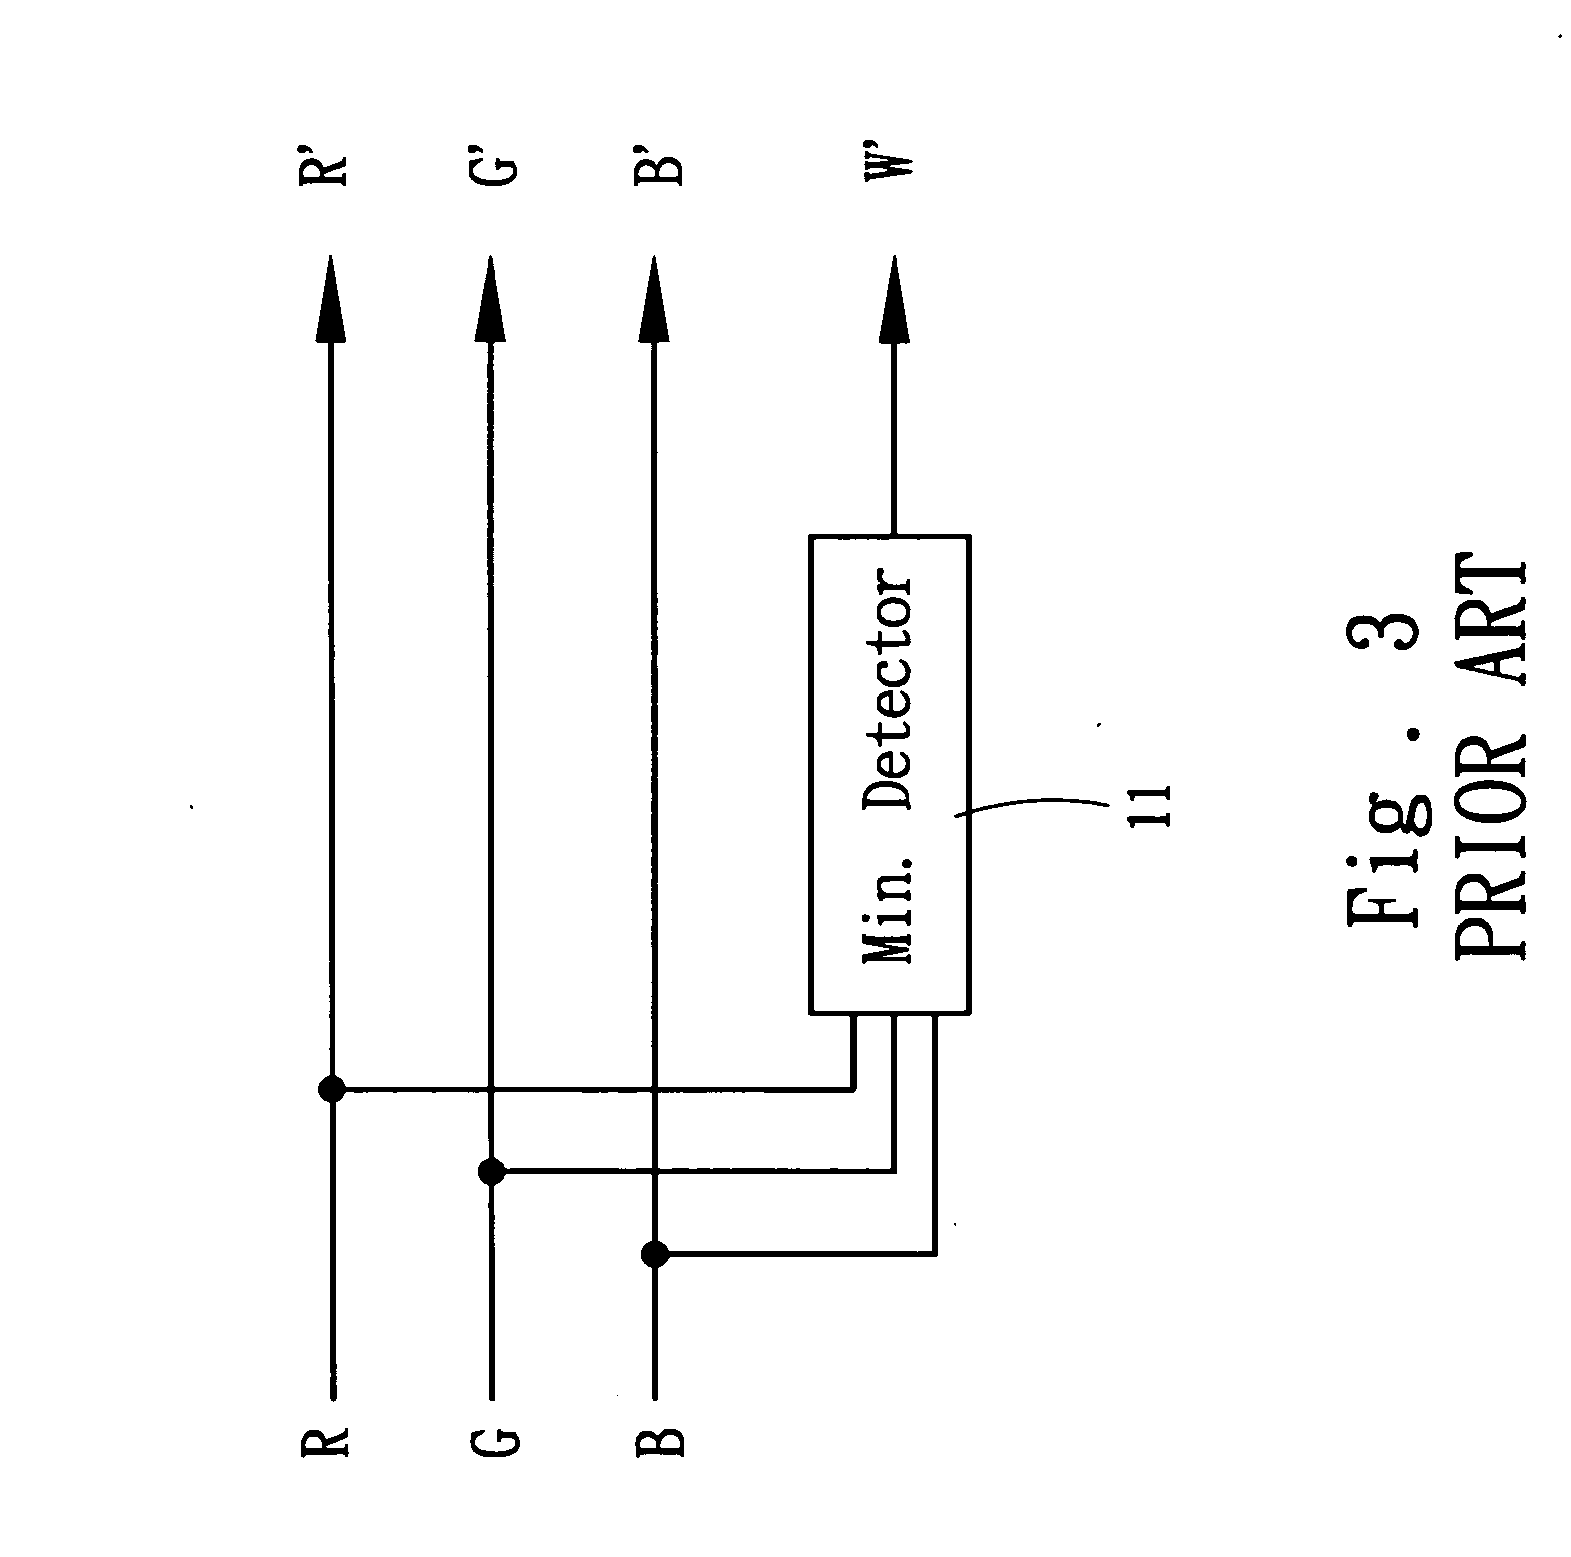 Image-processing device and method for enhancing the luminance and the image quality of display panels